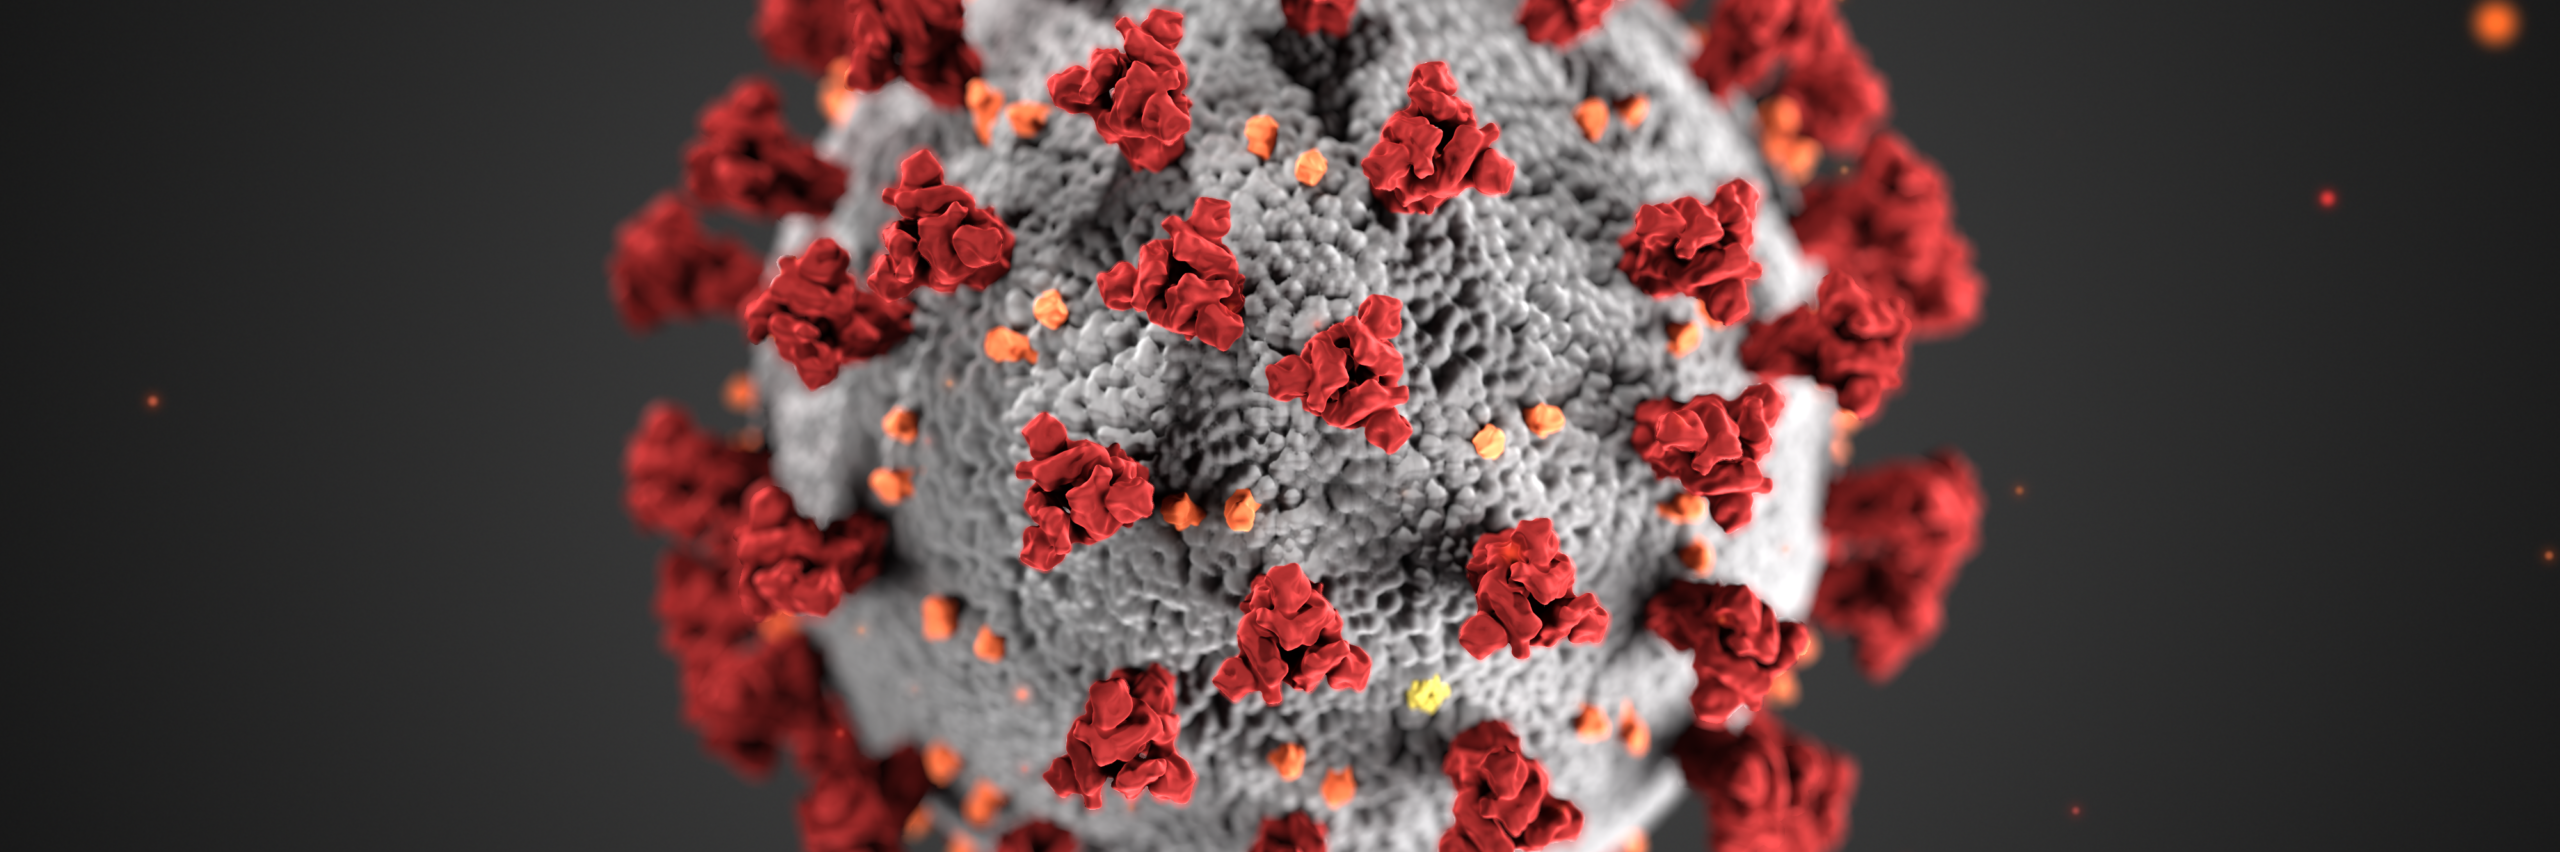 highly magnified image of a virus cell - grey ball with red coral like shapes coming out from it